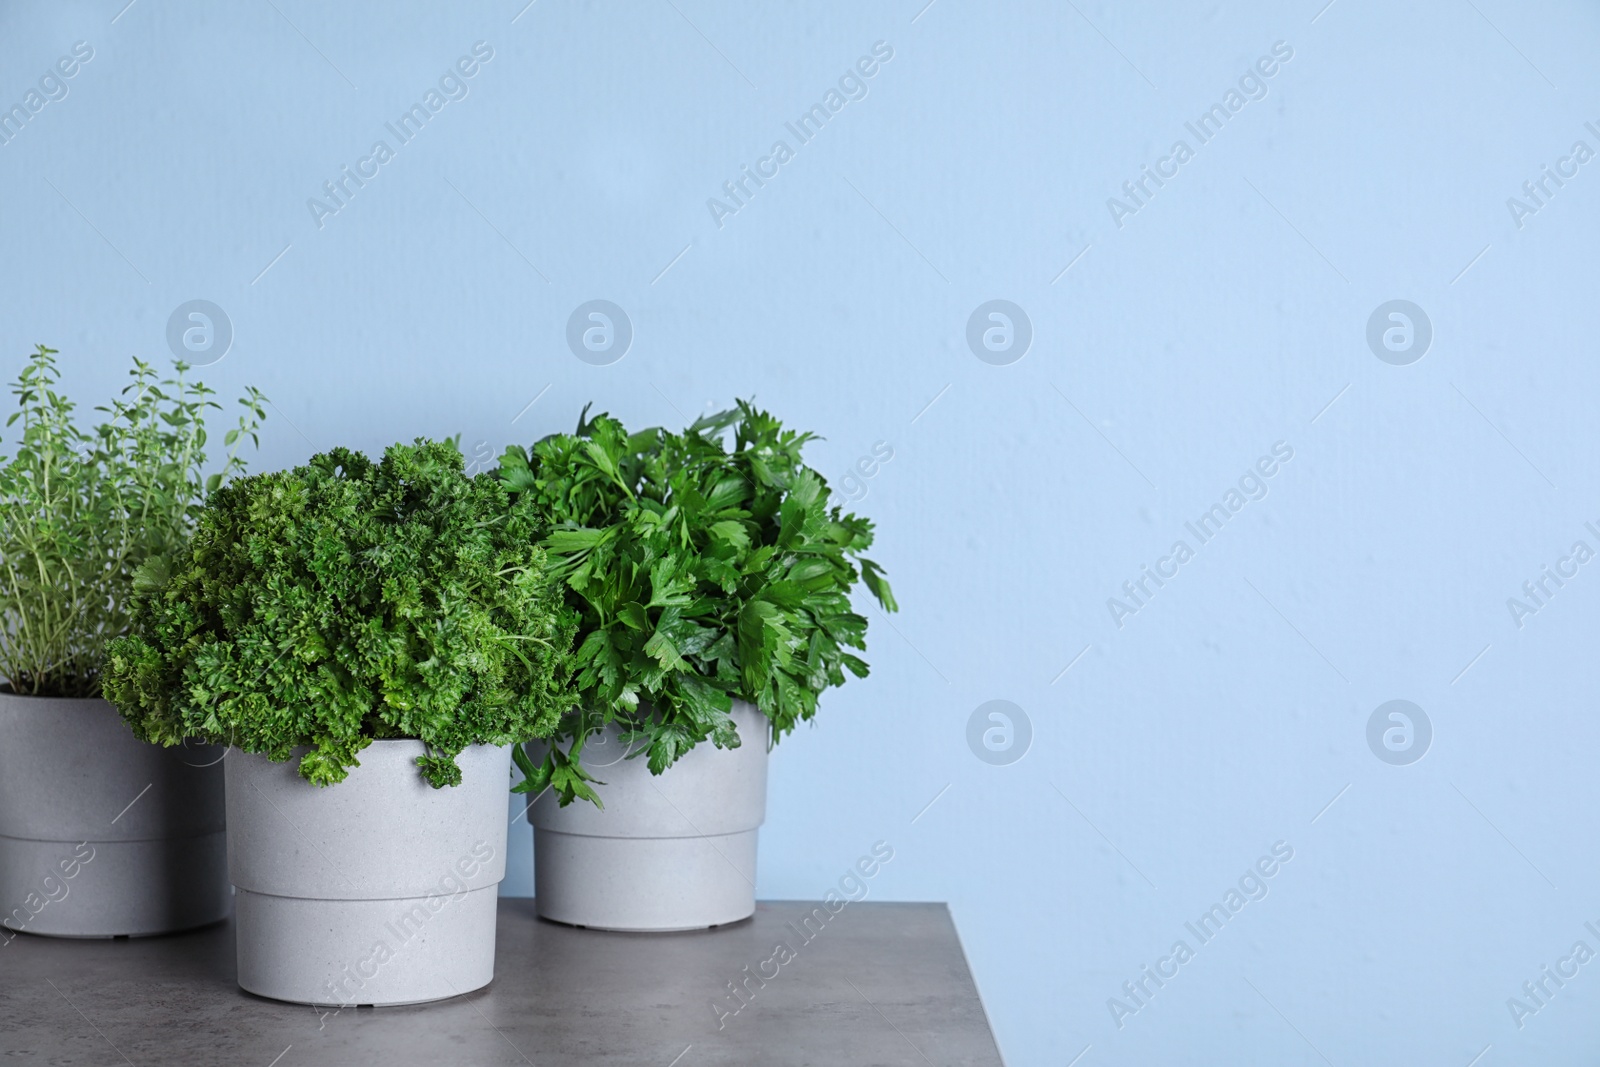 Photo of Seedlings of different aromatic herbs on grey marble table near blue wall. Space for text